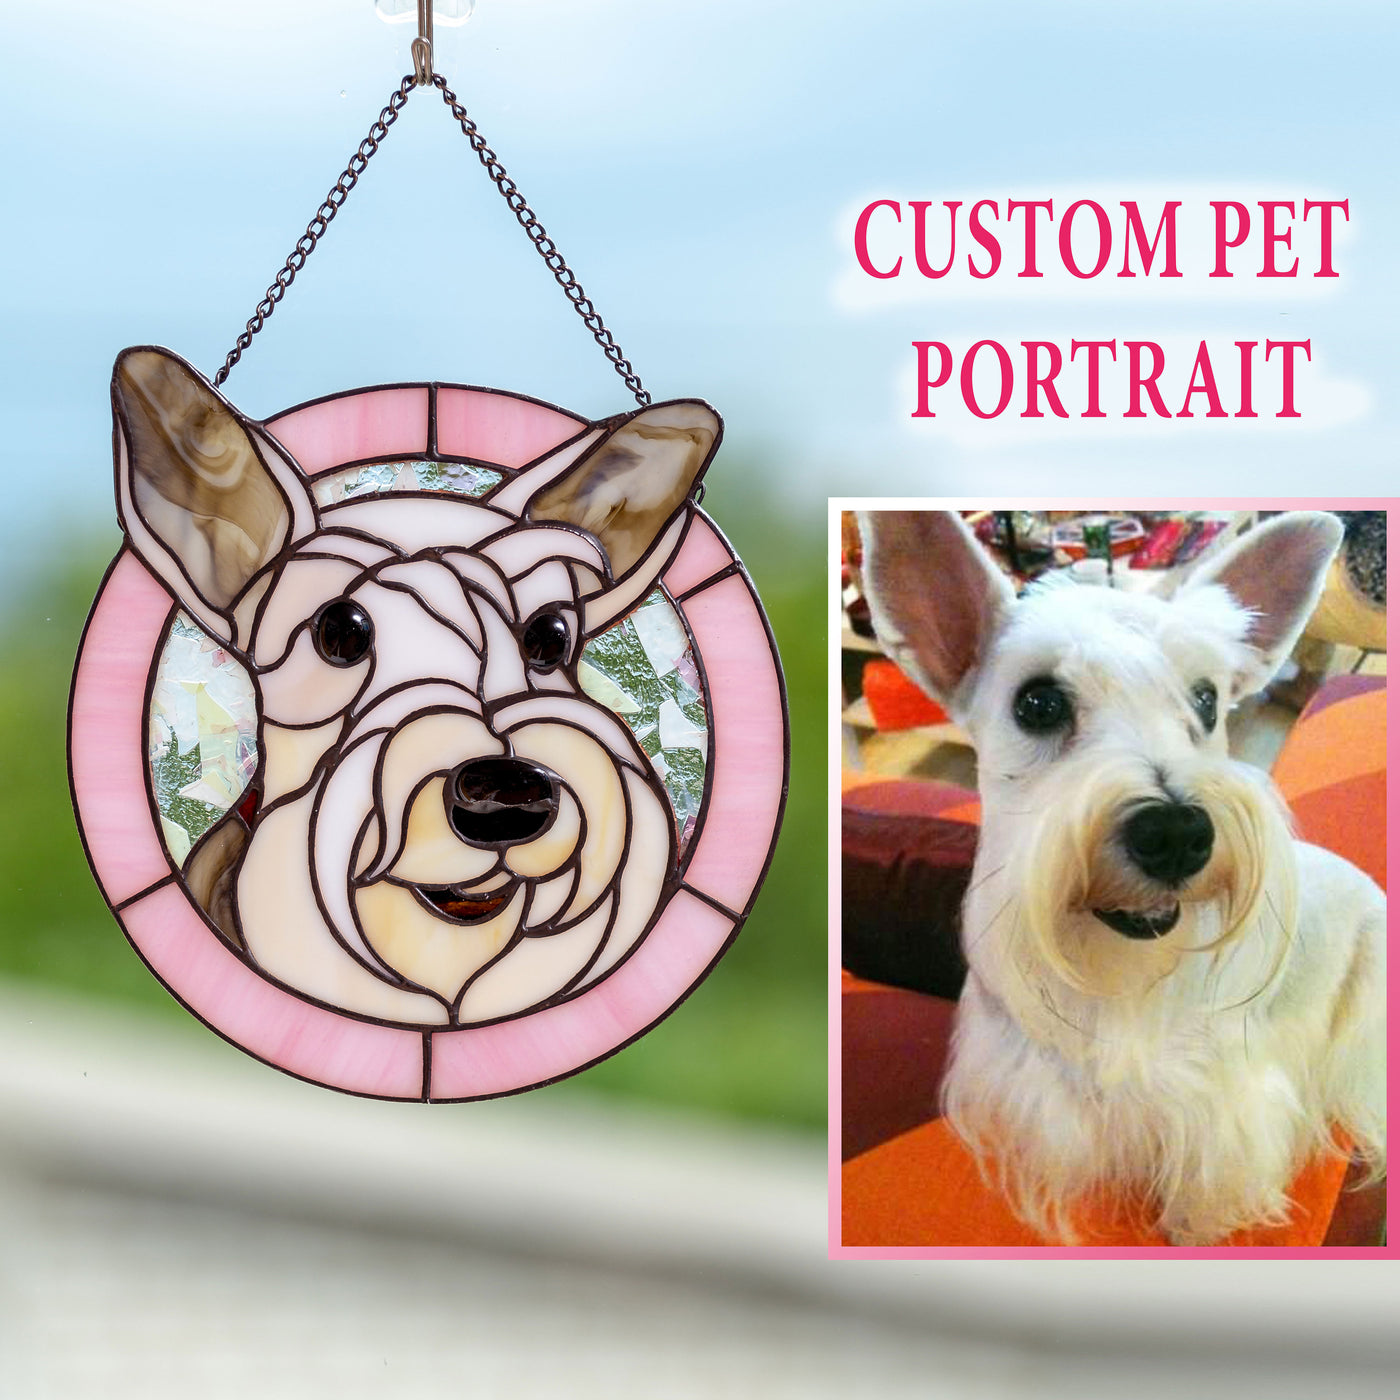 Custom stained glass pink-framed portrait of a dog made from photo